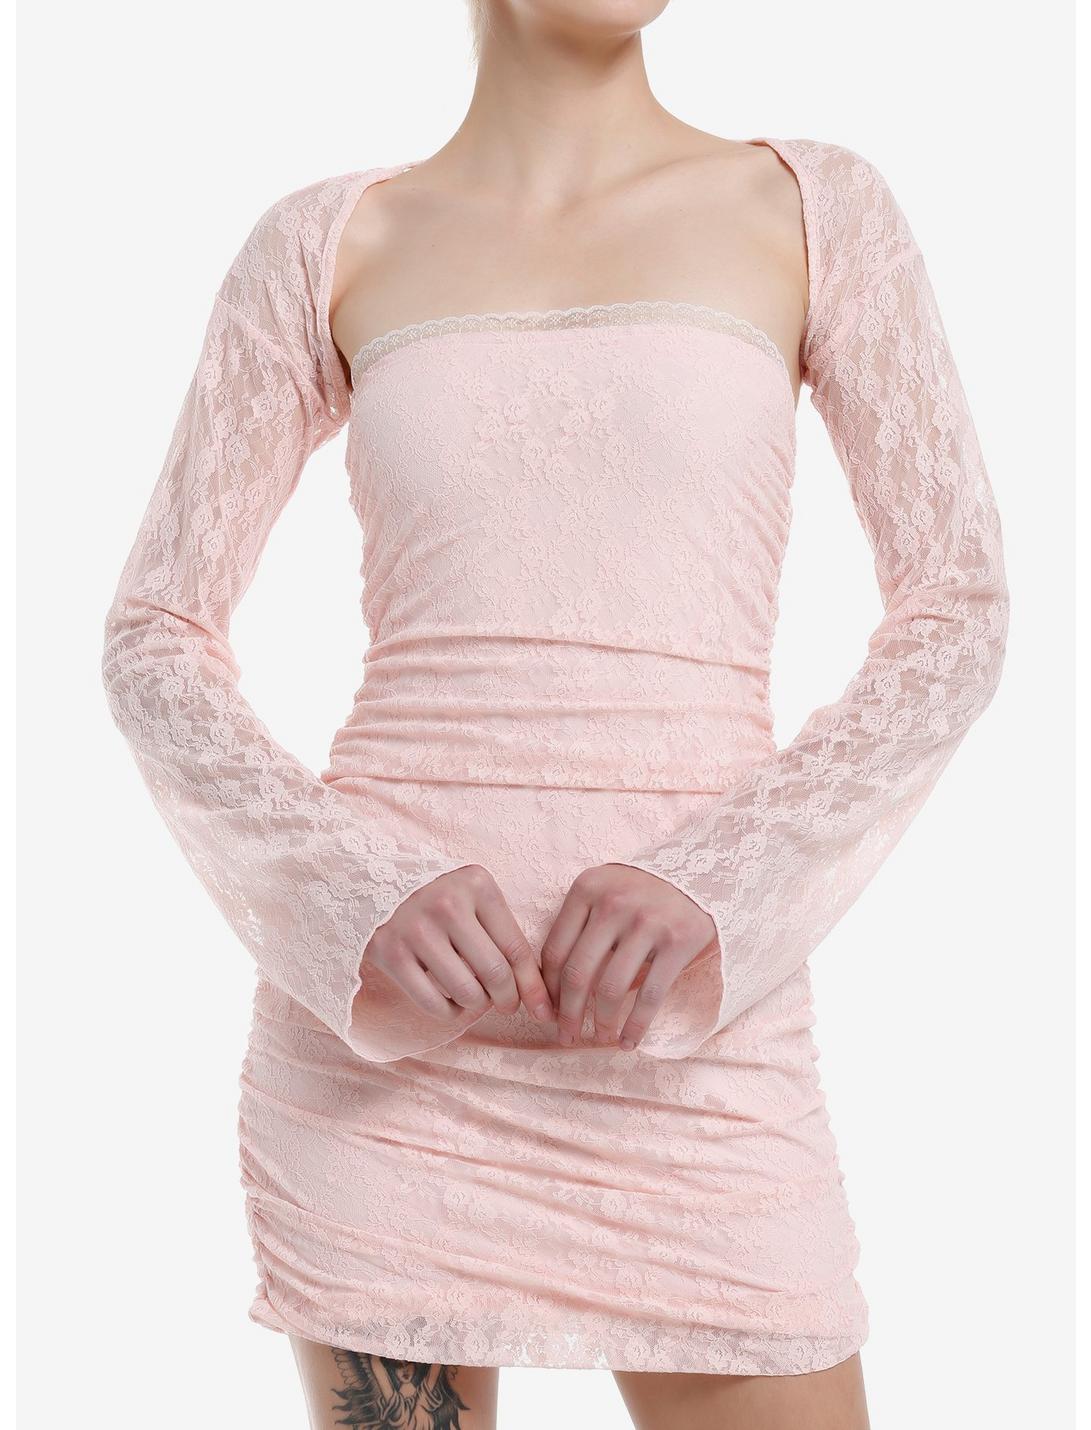 Daisy Street Pink Lace Ruched Bell Sleeve Dress, PINK, hi-res